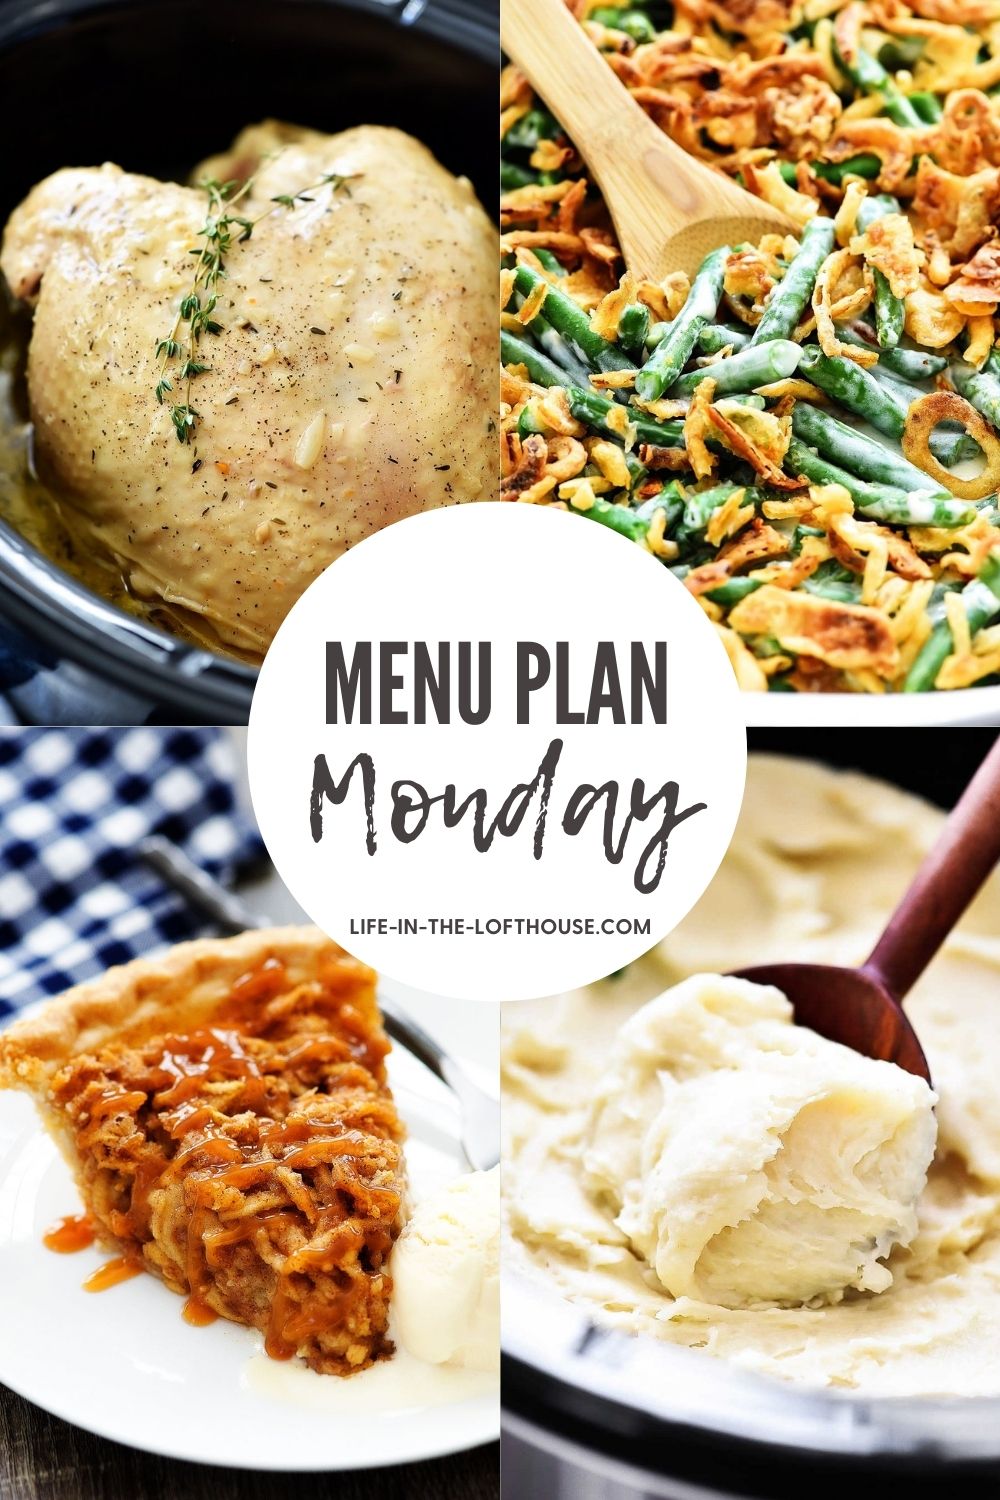 A weekly menu filled with dinner ideas and one dessert.